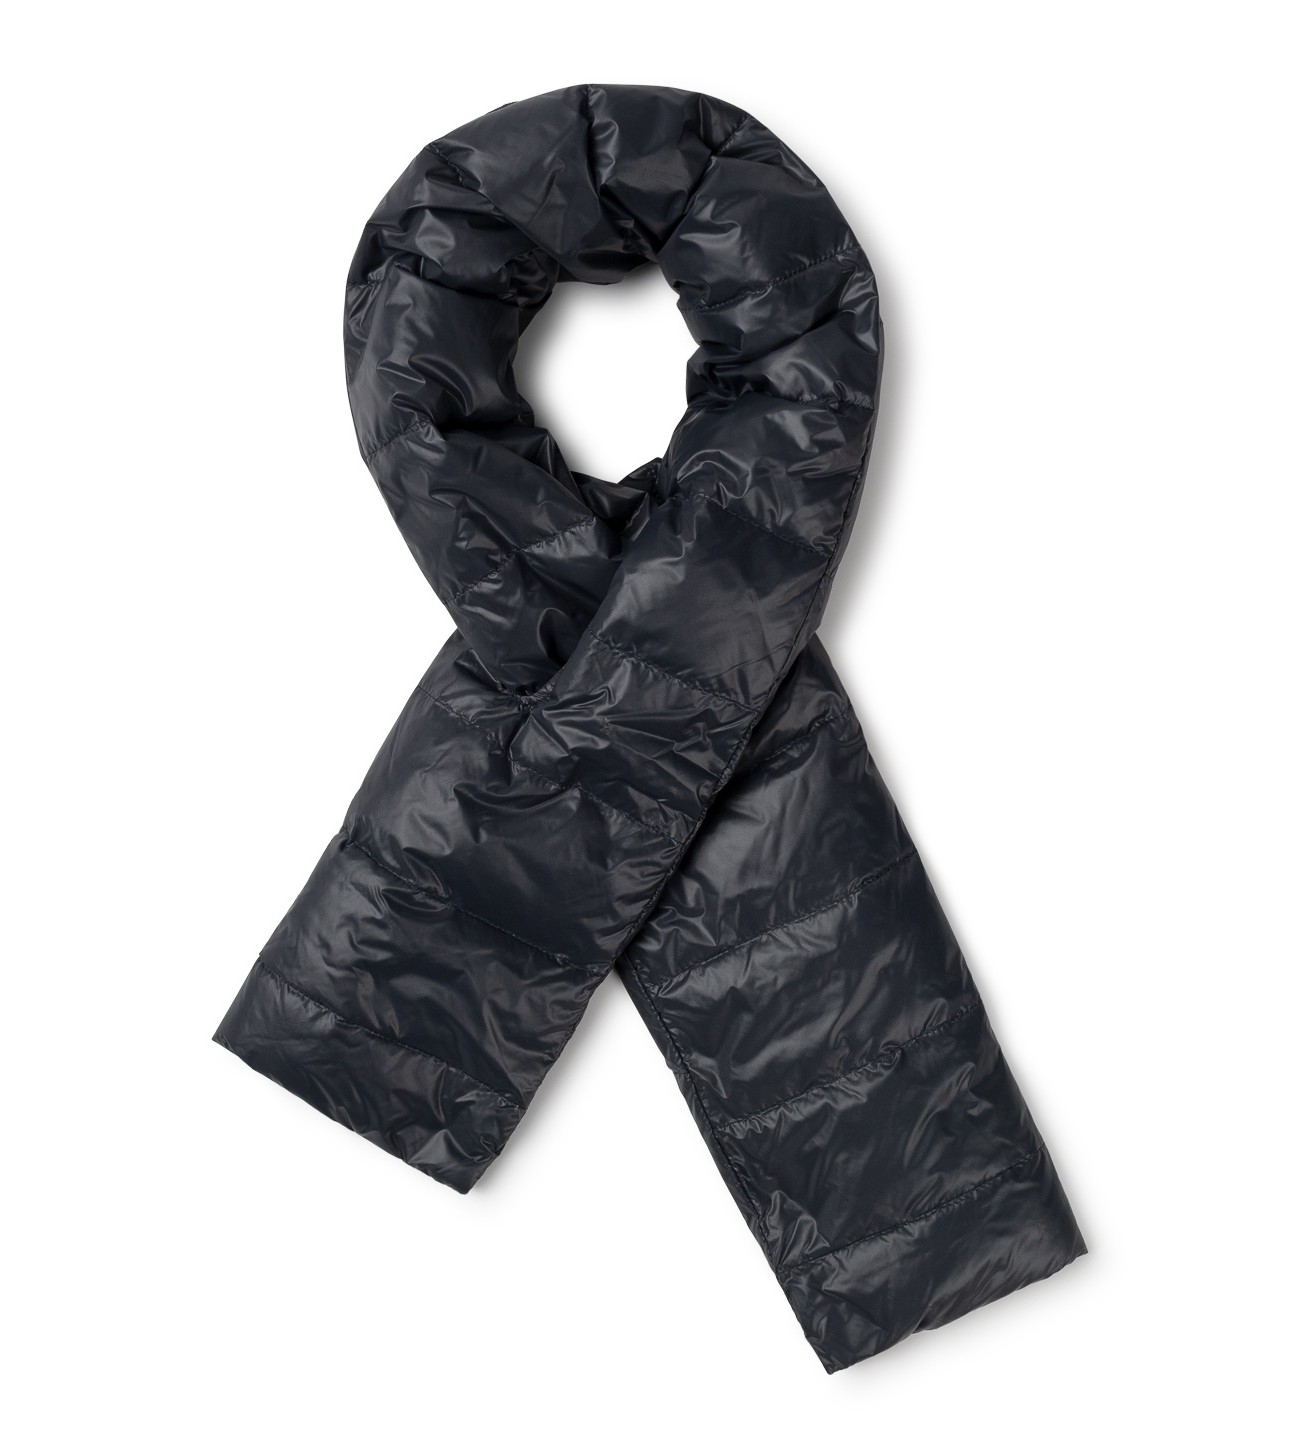 PESERICO_QUILTED_SCARF_IN_TECHNICAL_FABRIC_MARIONA_FASHION_CLOTHING_WOMAN_SHOP_ONLINE_S31344